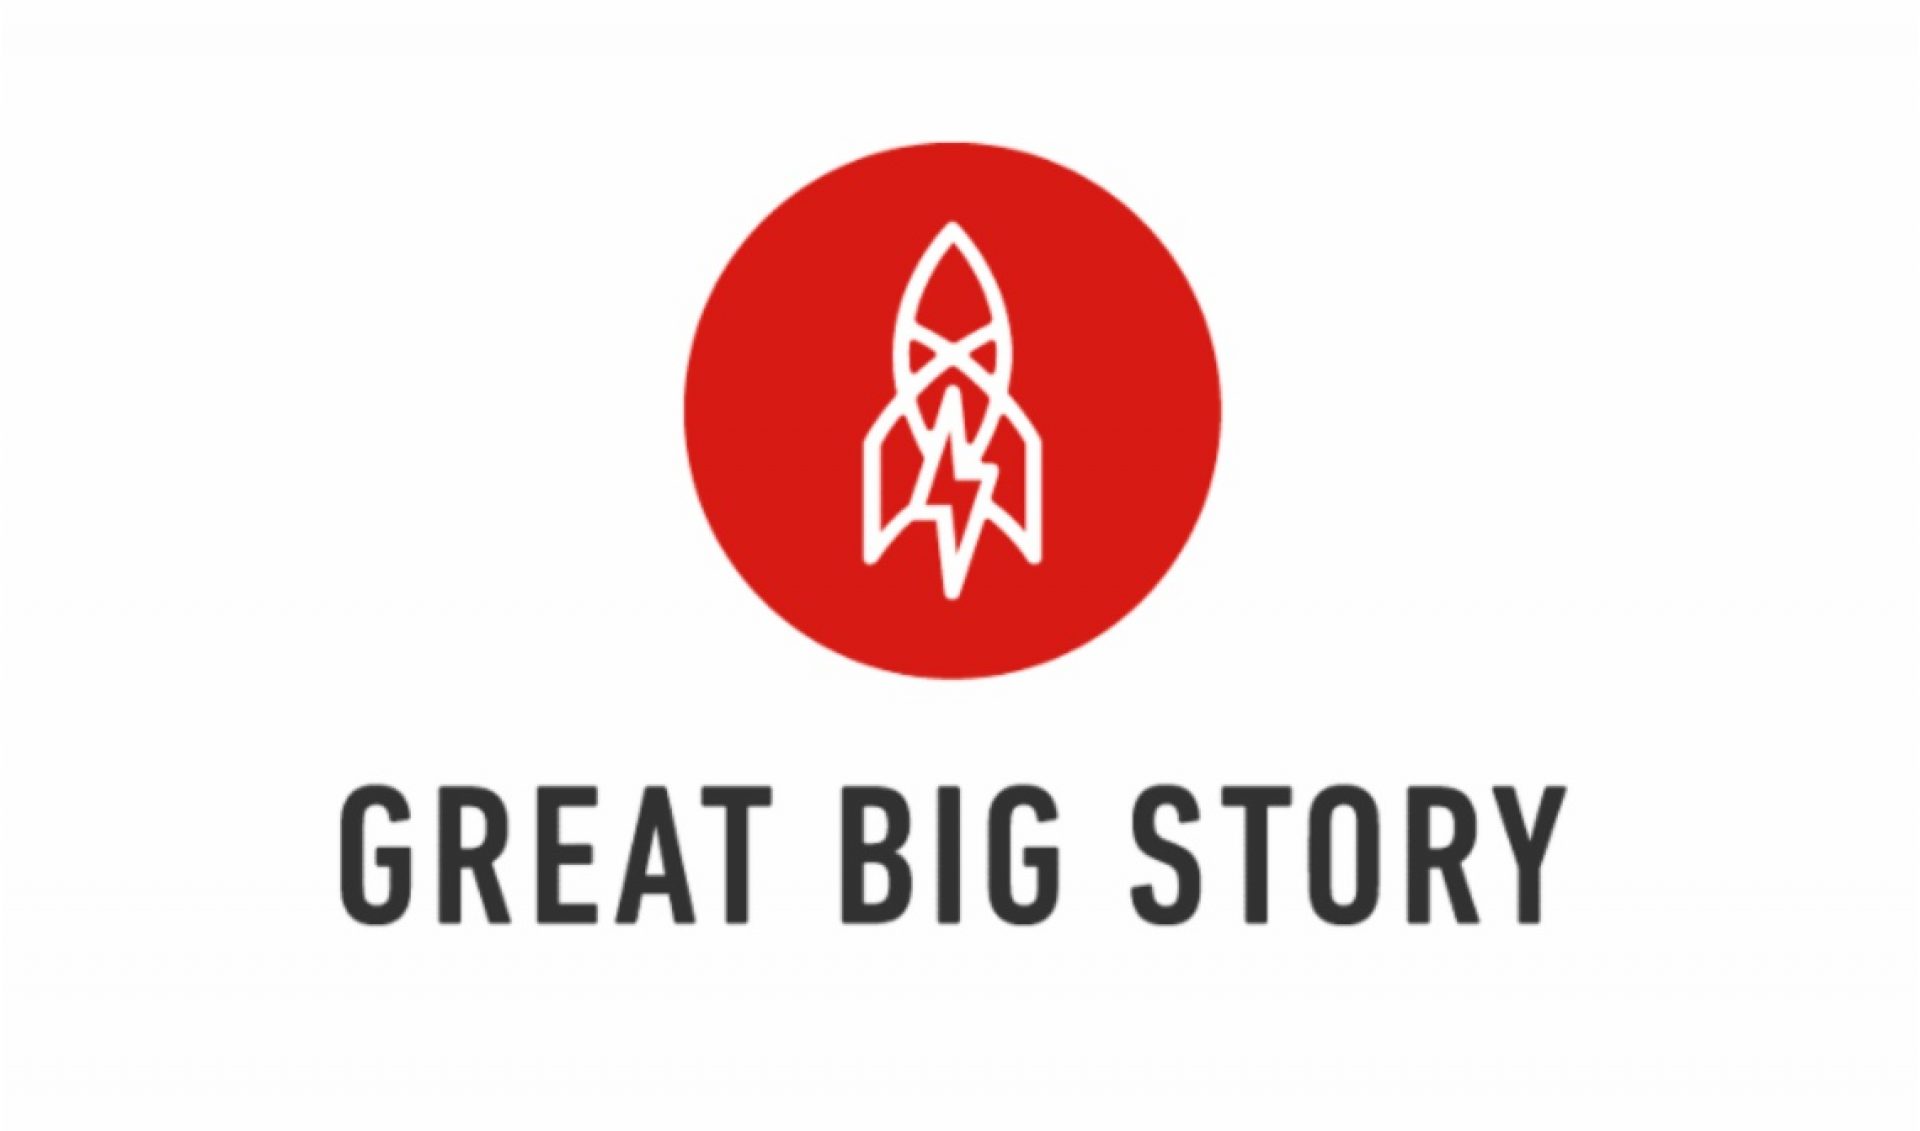 YouTube Millionaires: Great Big Story Aims To Make The World “Feel Just A Little Bit Smaller”